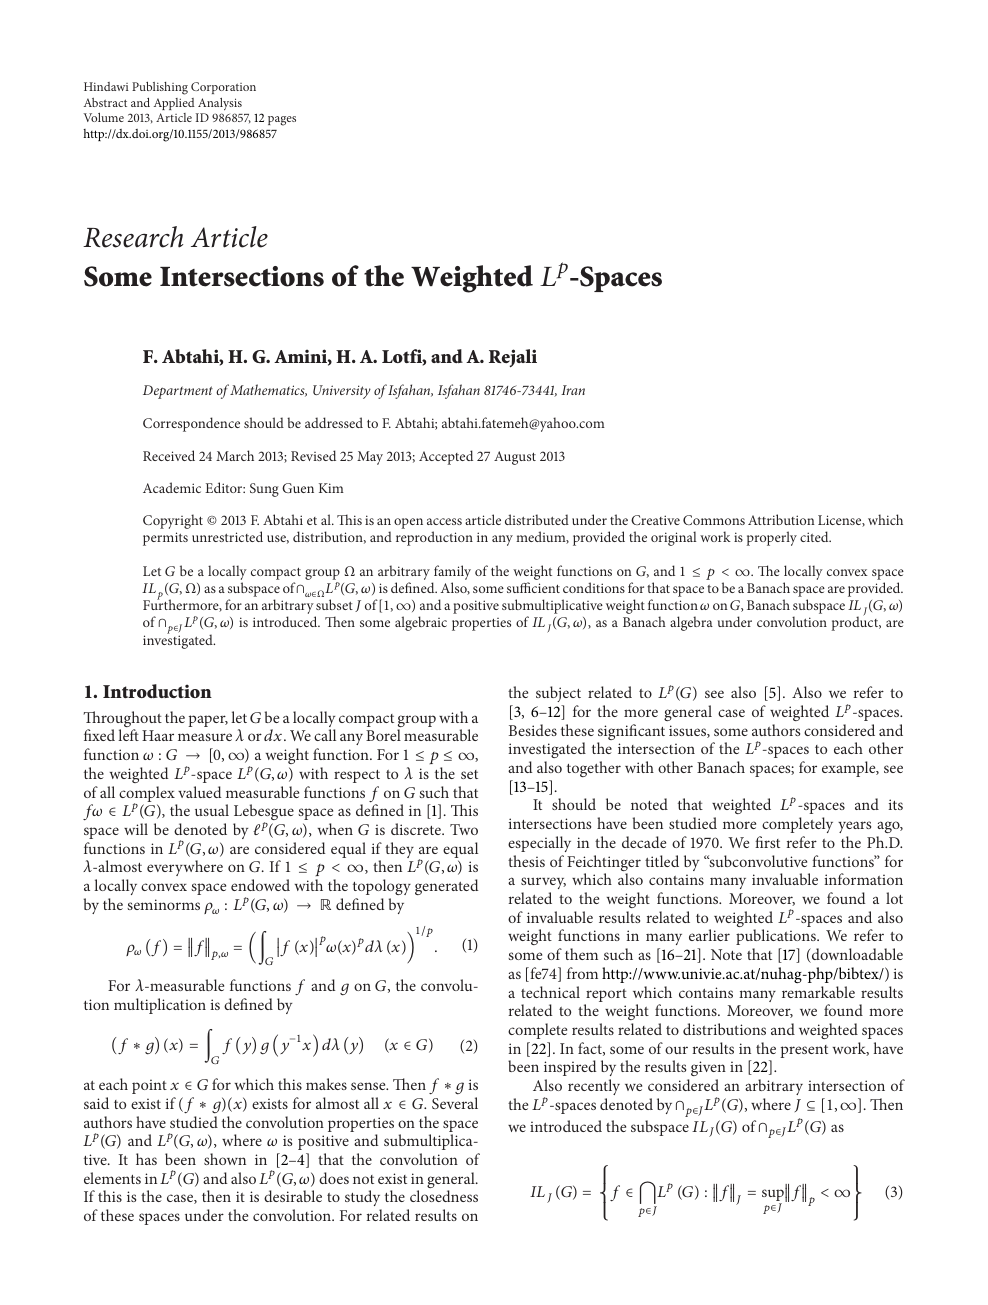 Some Intersections Of The Weighted Spaces Topic Of Research Paper In Mathematics Download Scholarly Article Pdf And Read For Free On Cyberleninka Open Science Hub